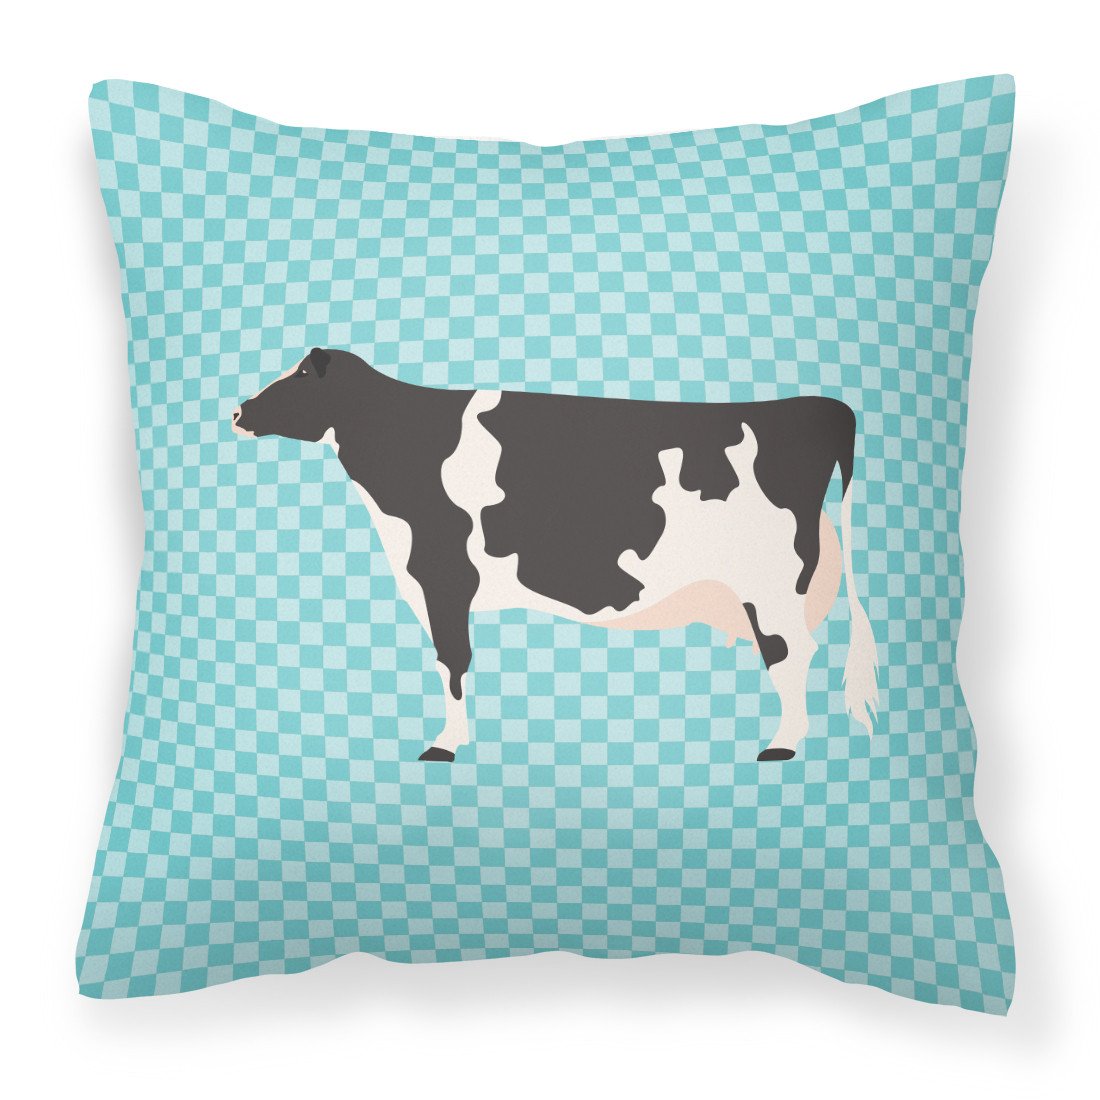 Holstein Cow Blue Check Fabric Decorative Pillow BB7996PW1818 by Caroline's Treasures